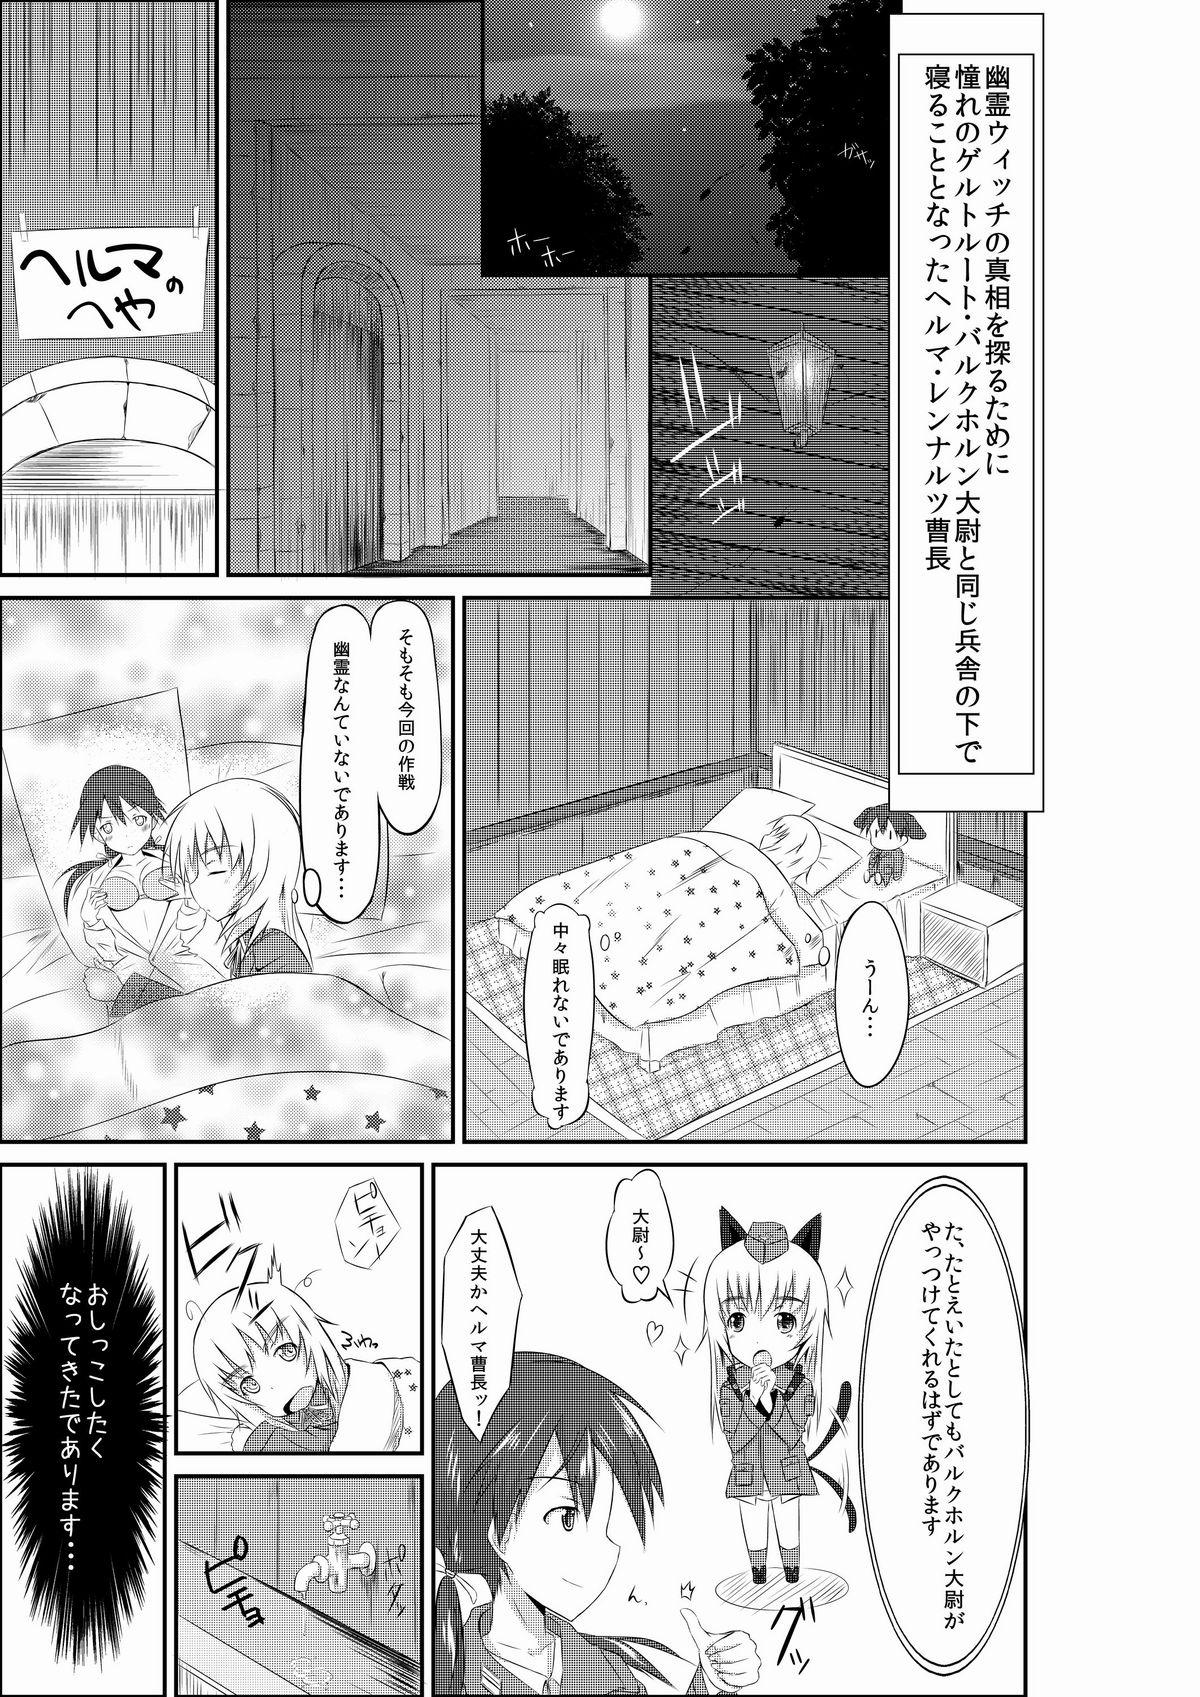 Gayemo 練習 お姉ちゃんとヘルマちゃん - Strike witches Porno 18 - Page 1